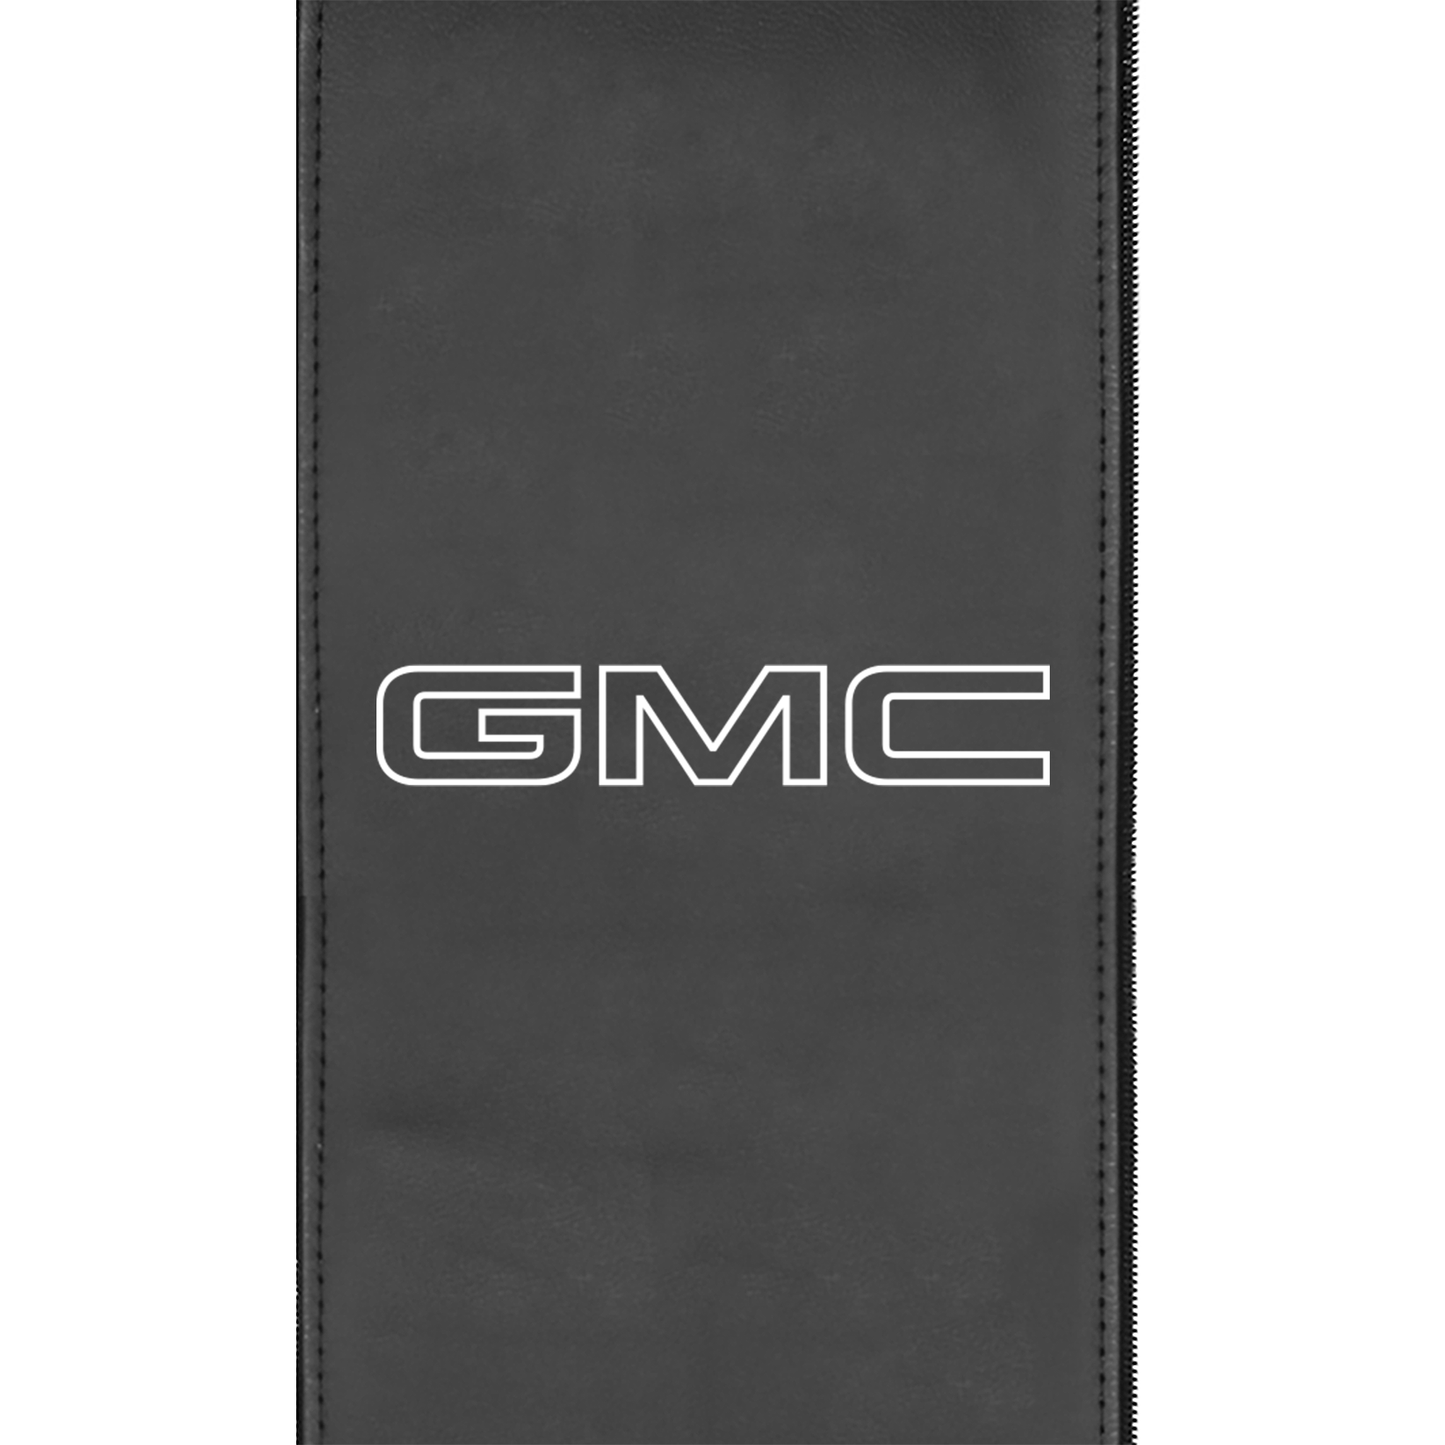 Office Chair 1000 with GMC Alternate Logo